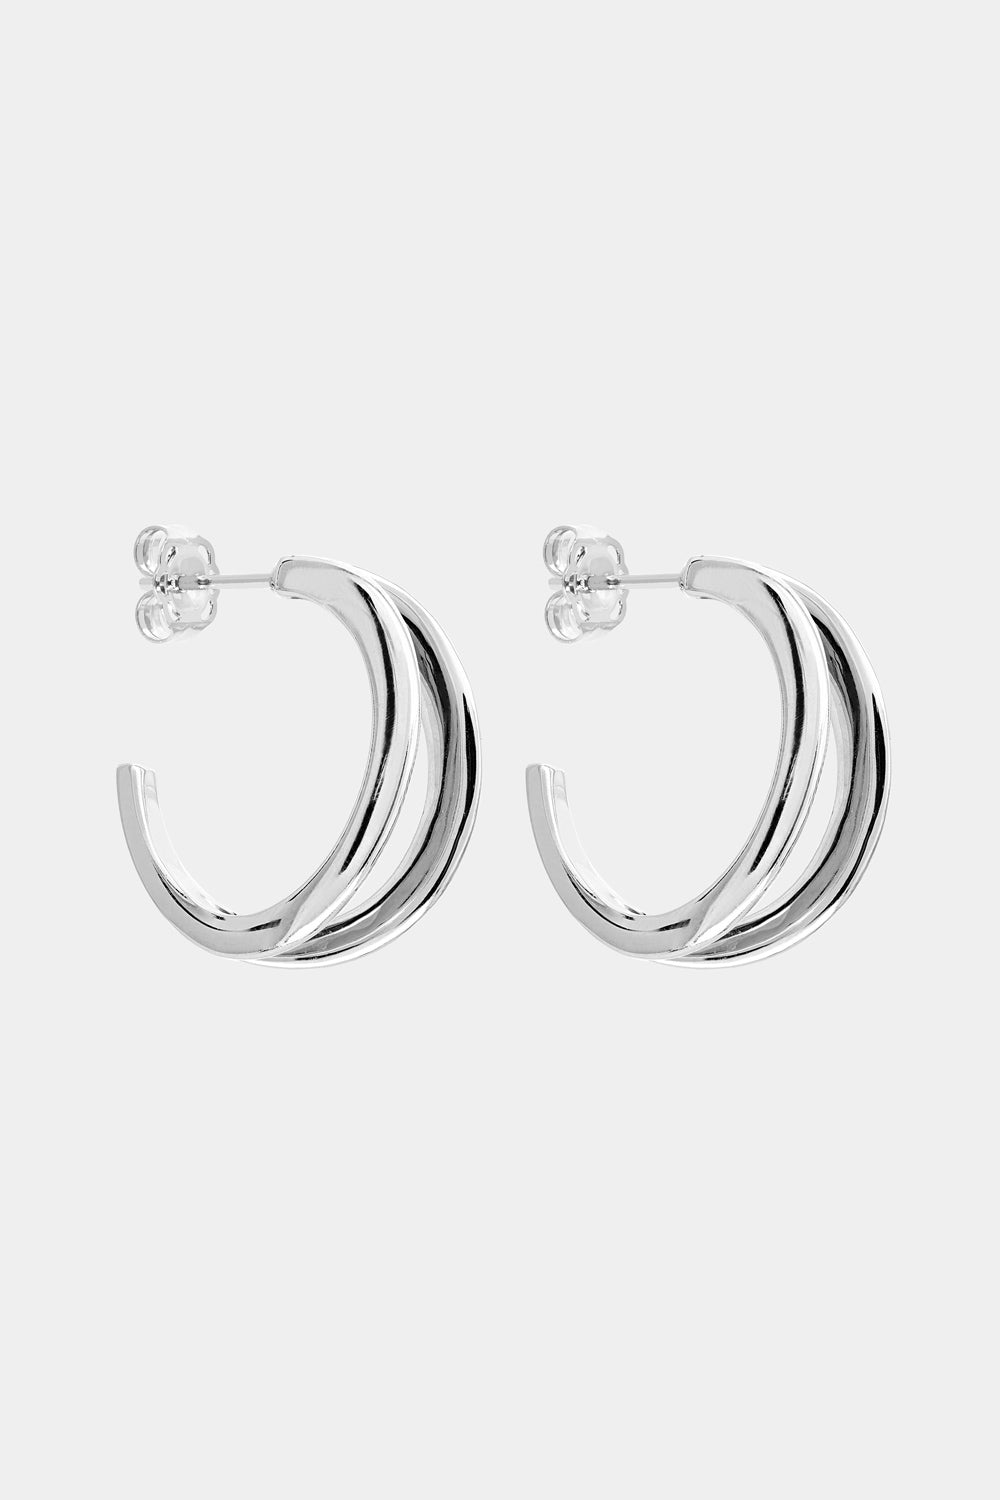 Double Band Hoops | Silver or 9K White Gold, More Options Available